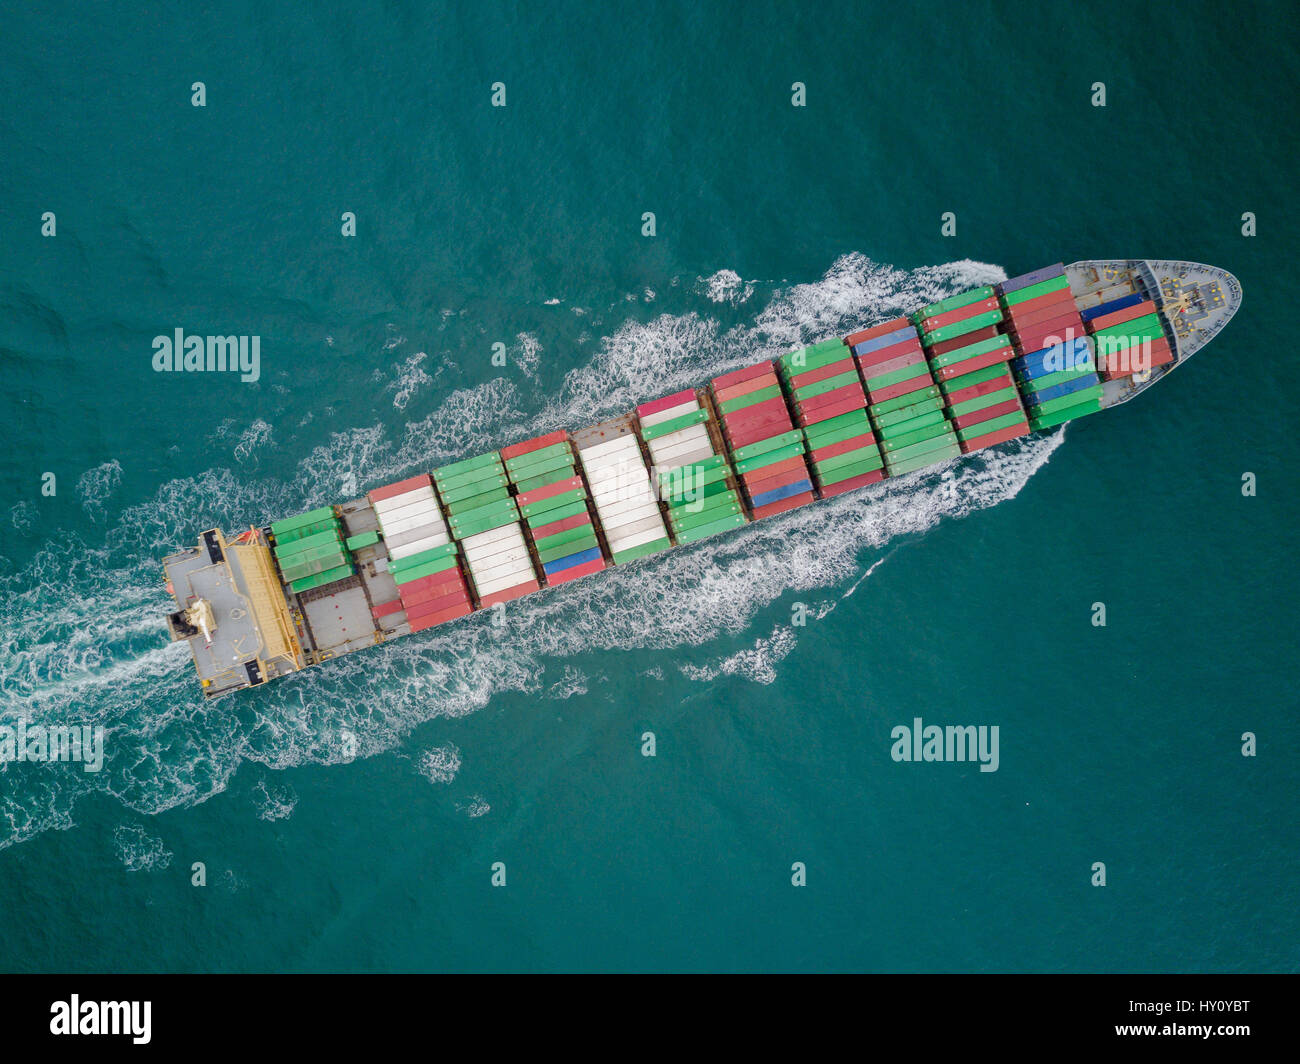 Aerial image taken directly above a container ship entering Hong Kong, Lamma channel. Stock Photo